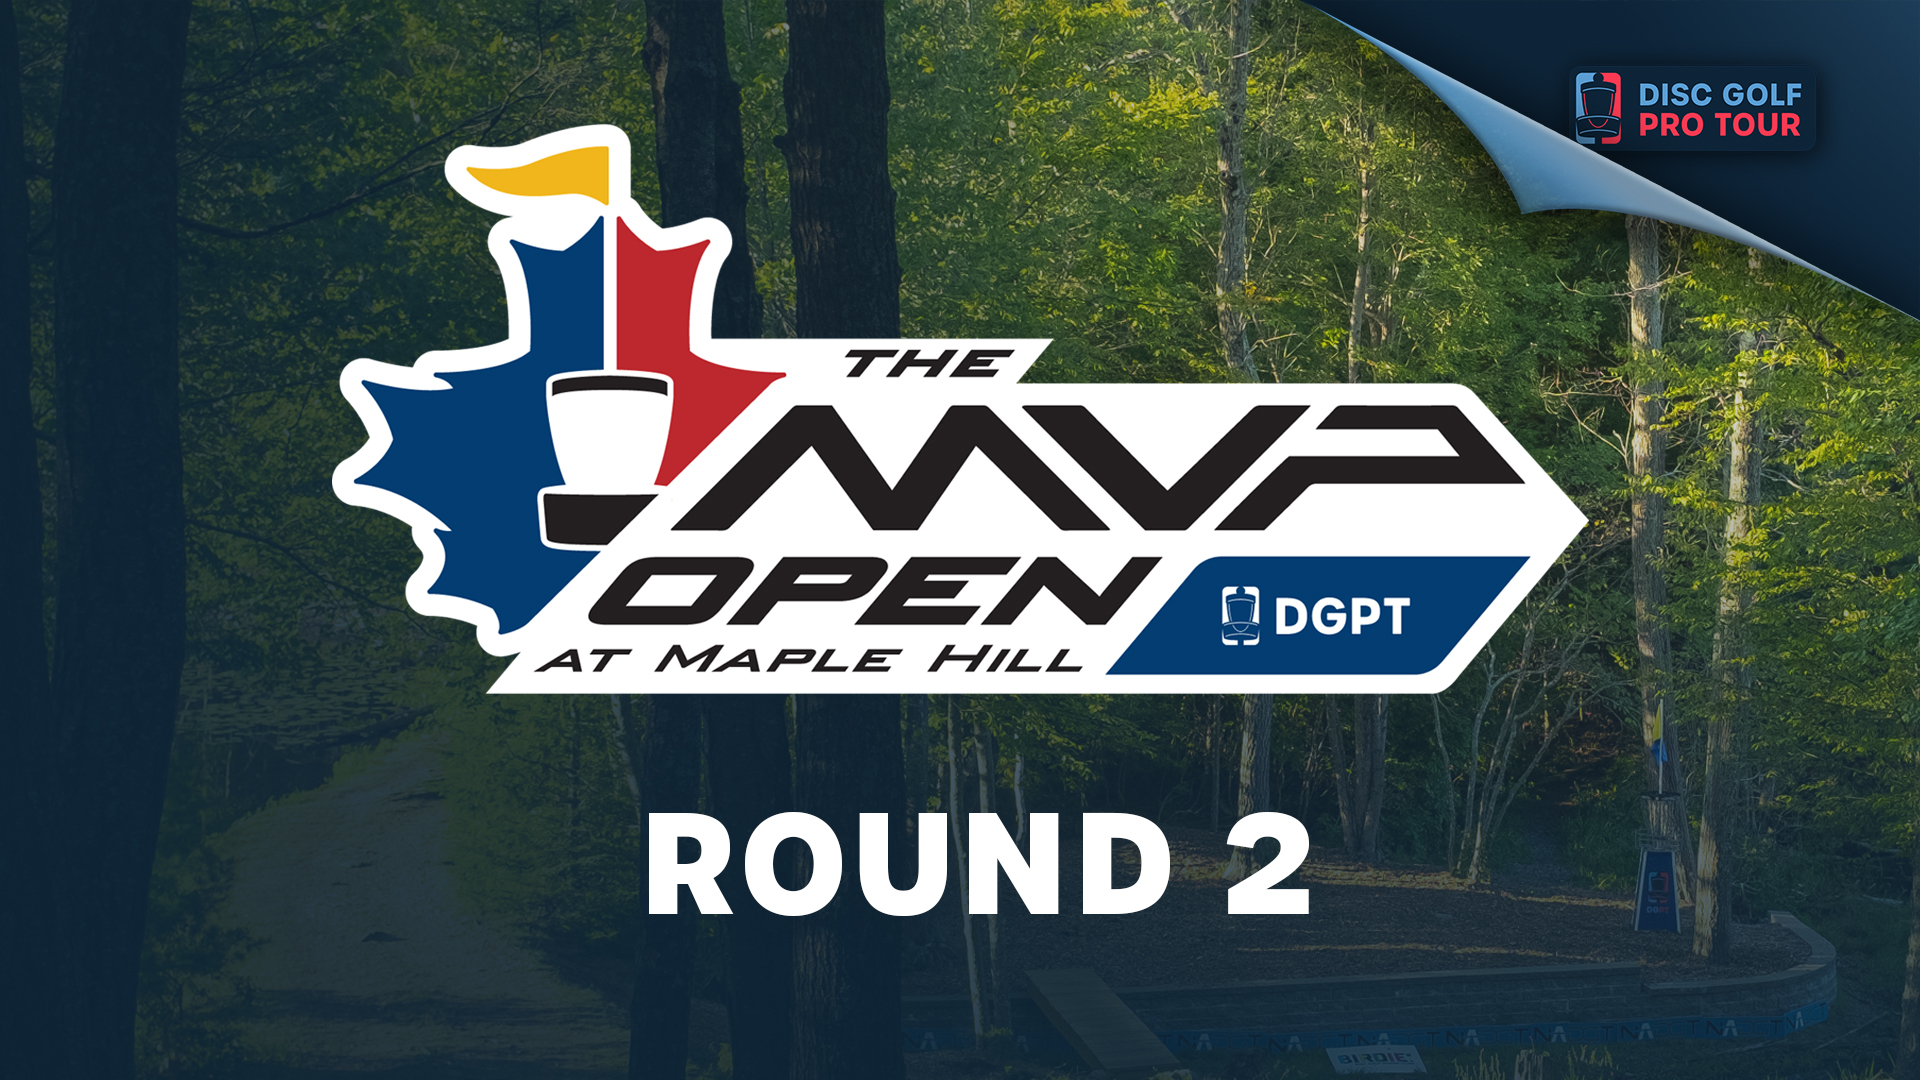 Round 2 MVP Open at Maple Hill - Part 1 - 2021